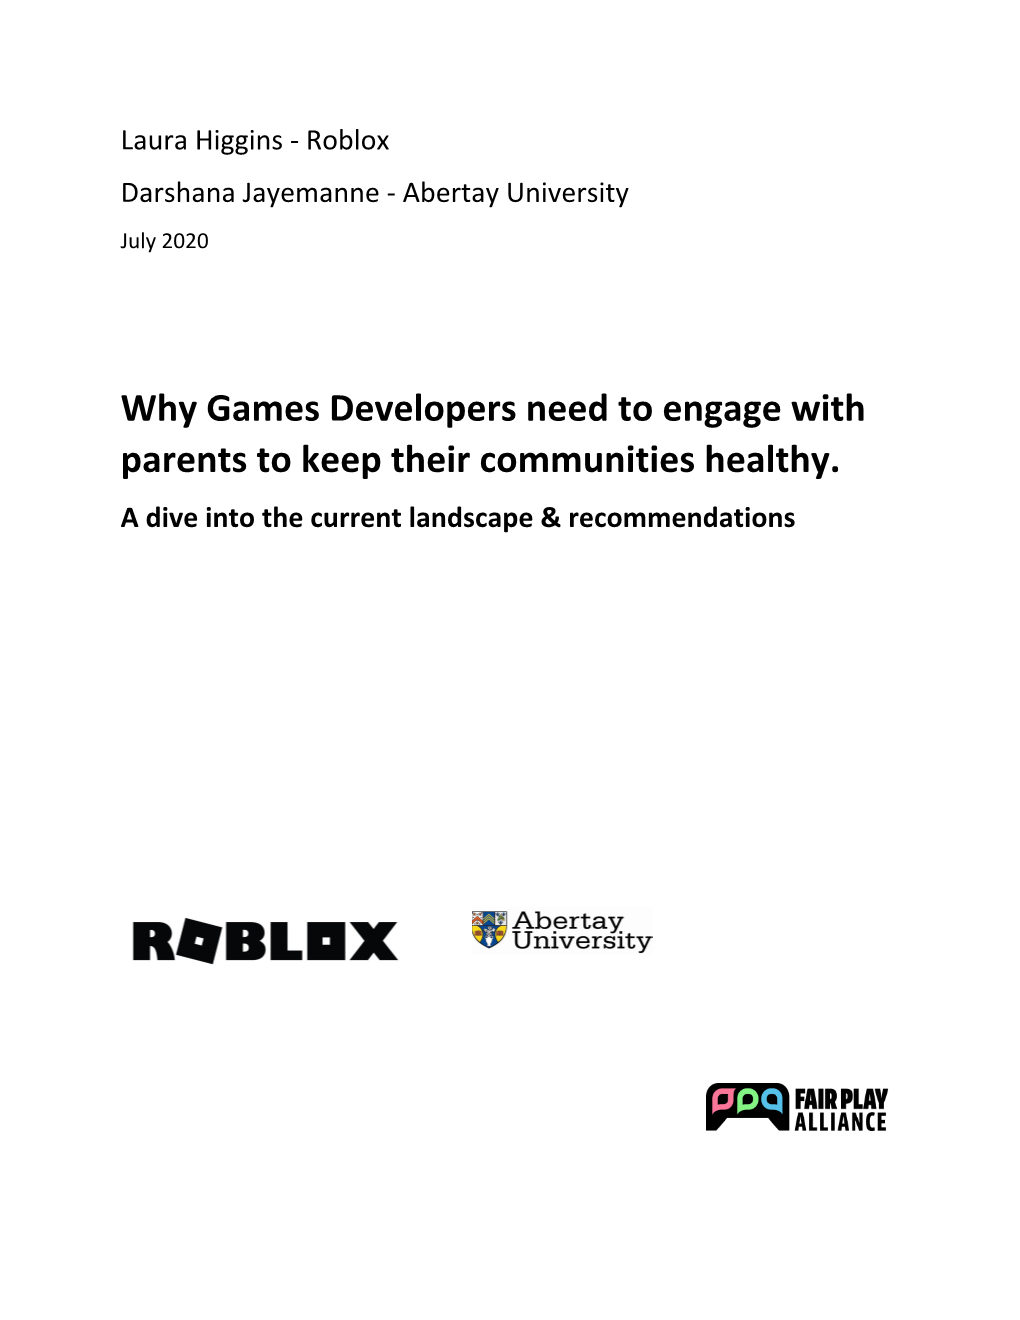 Why Games Developers Need to Engage with Parents to Keep Their Communities Healthy